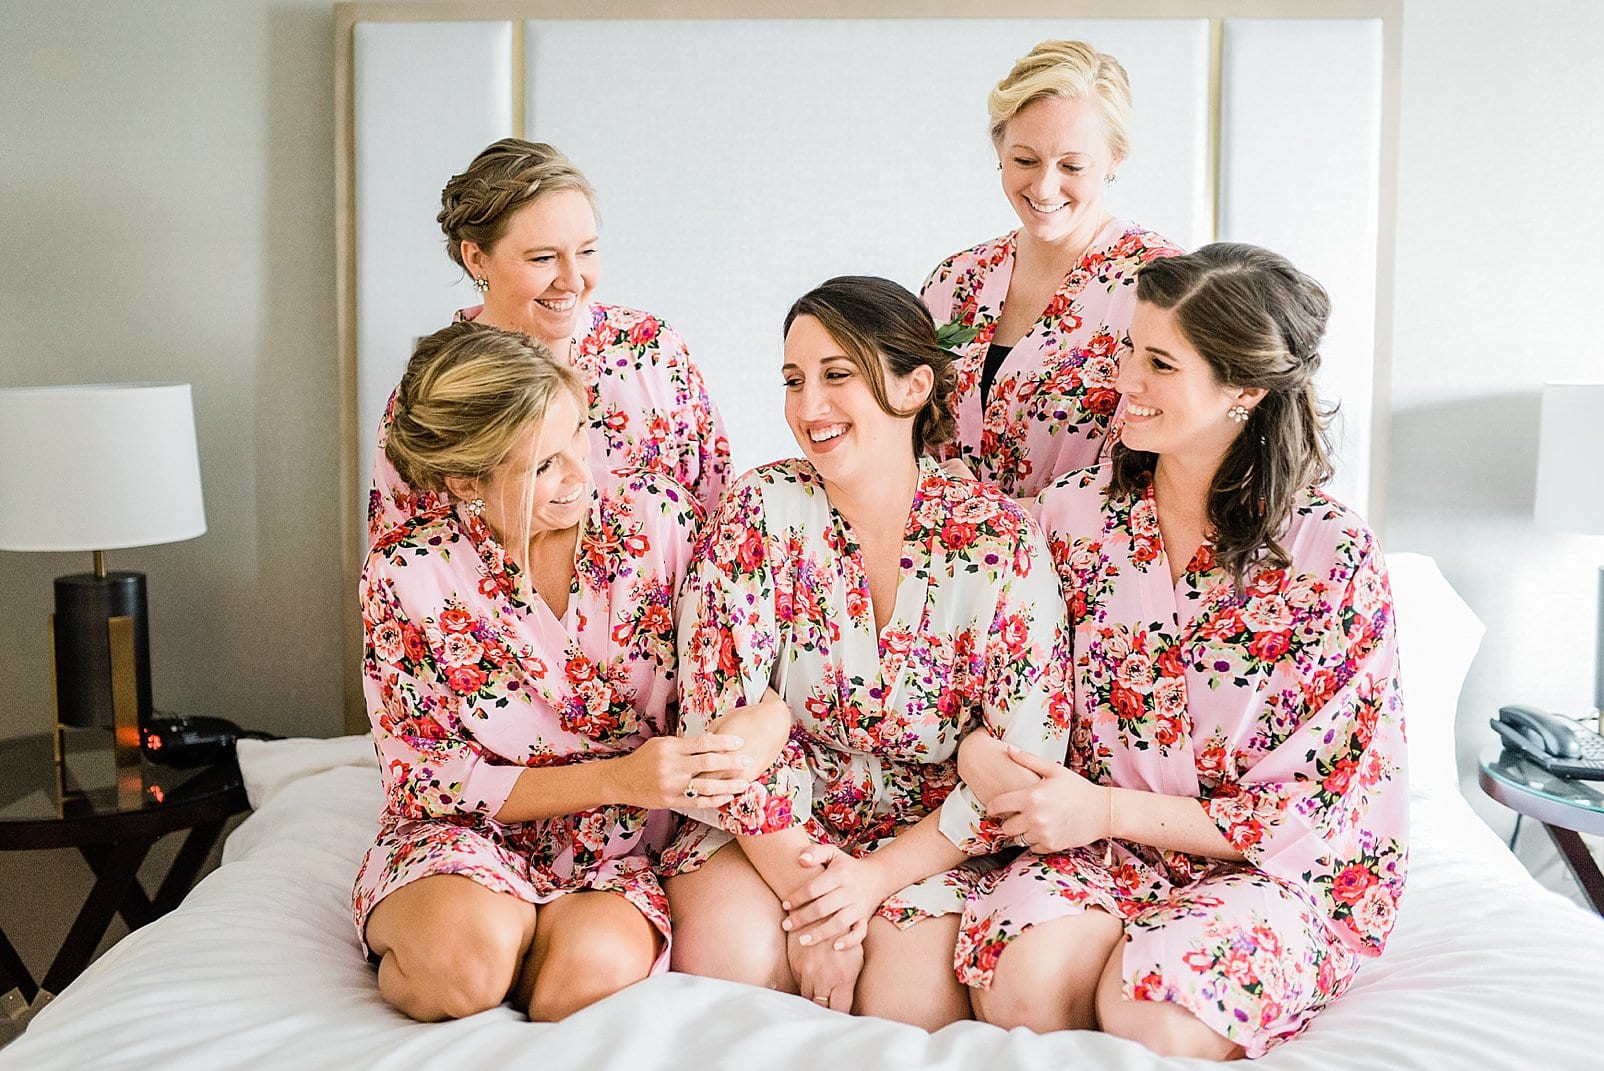 downtown raleigh wedding bridesmaids in robes on bed with bride photo